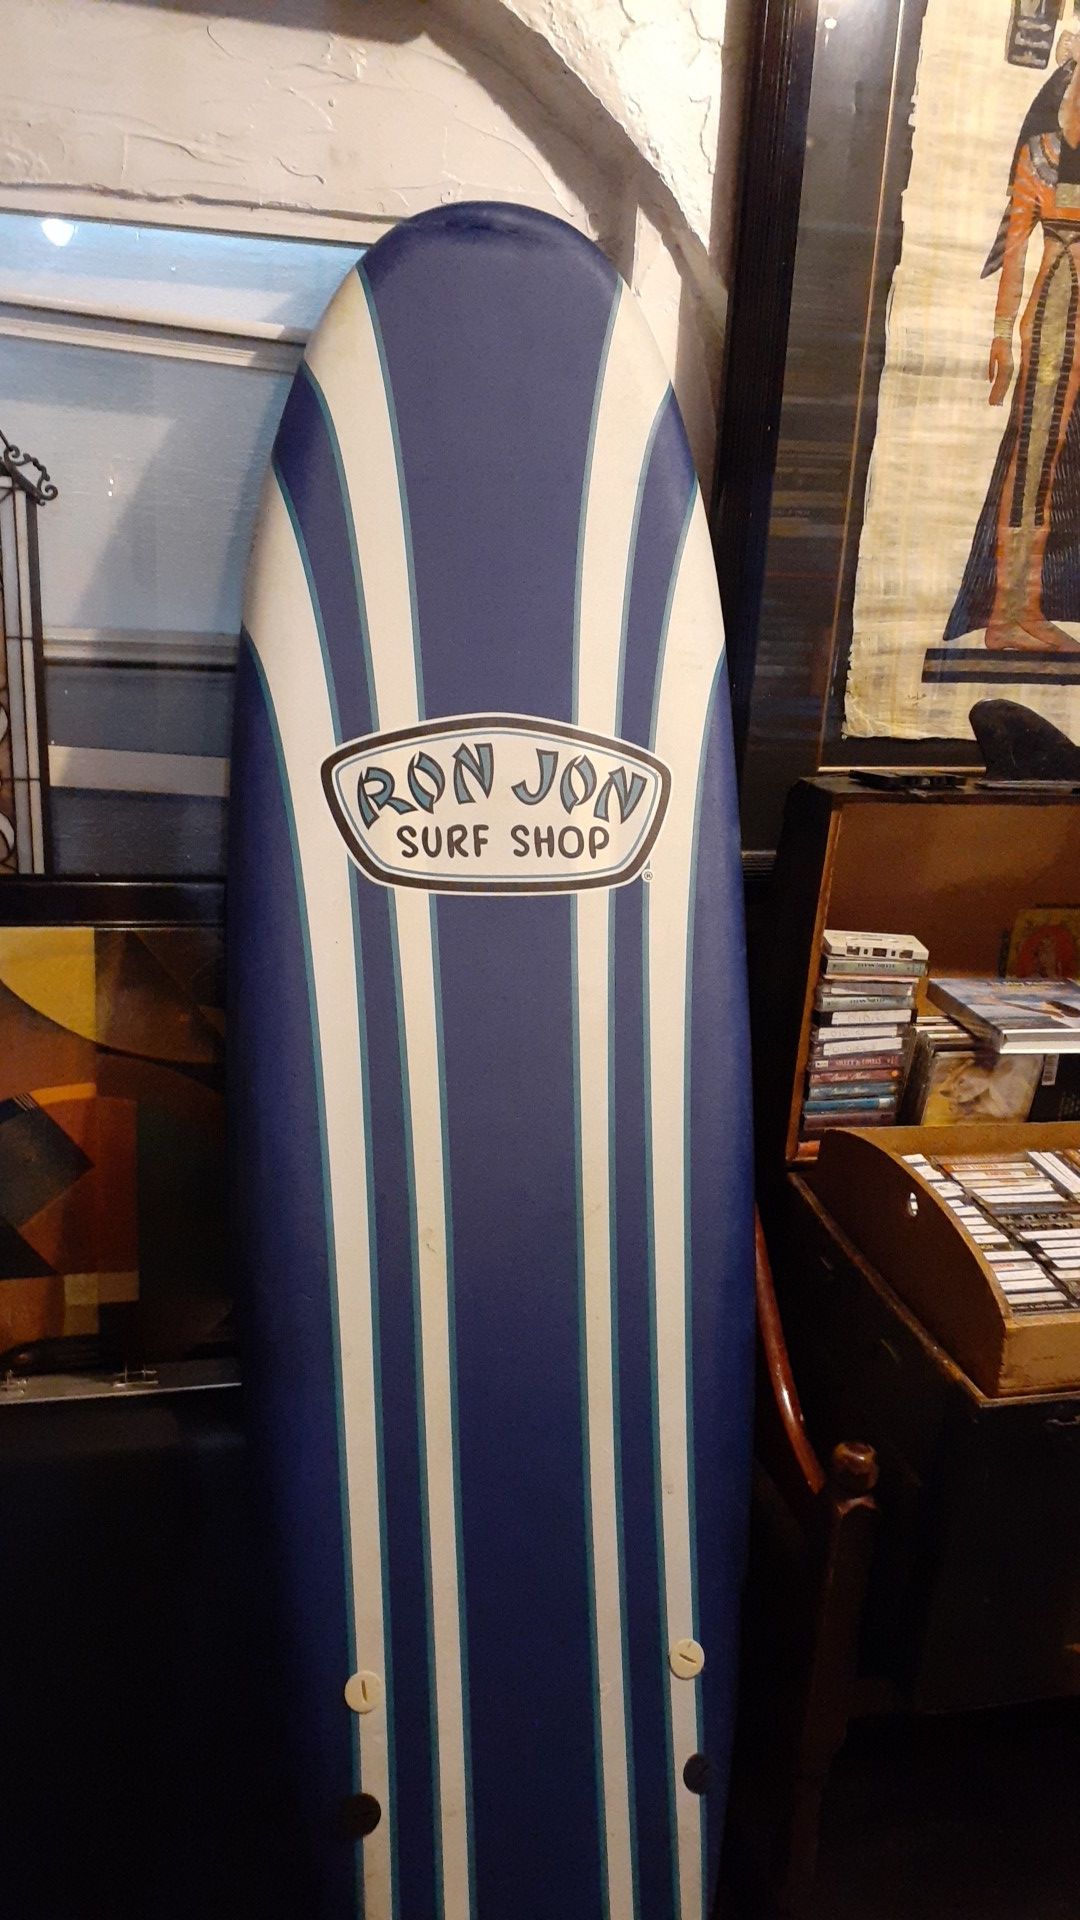 Surfboard softboard 77 x 20 about